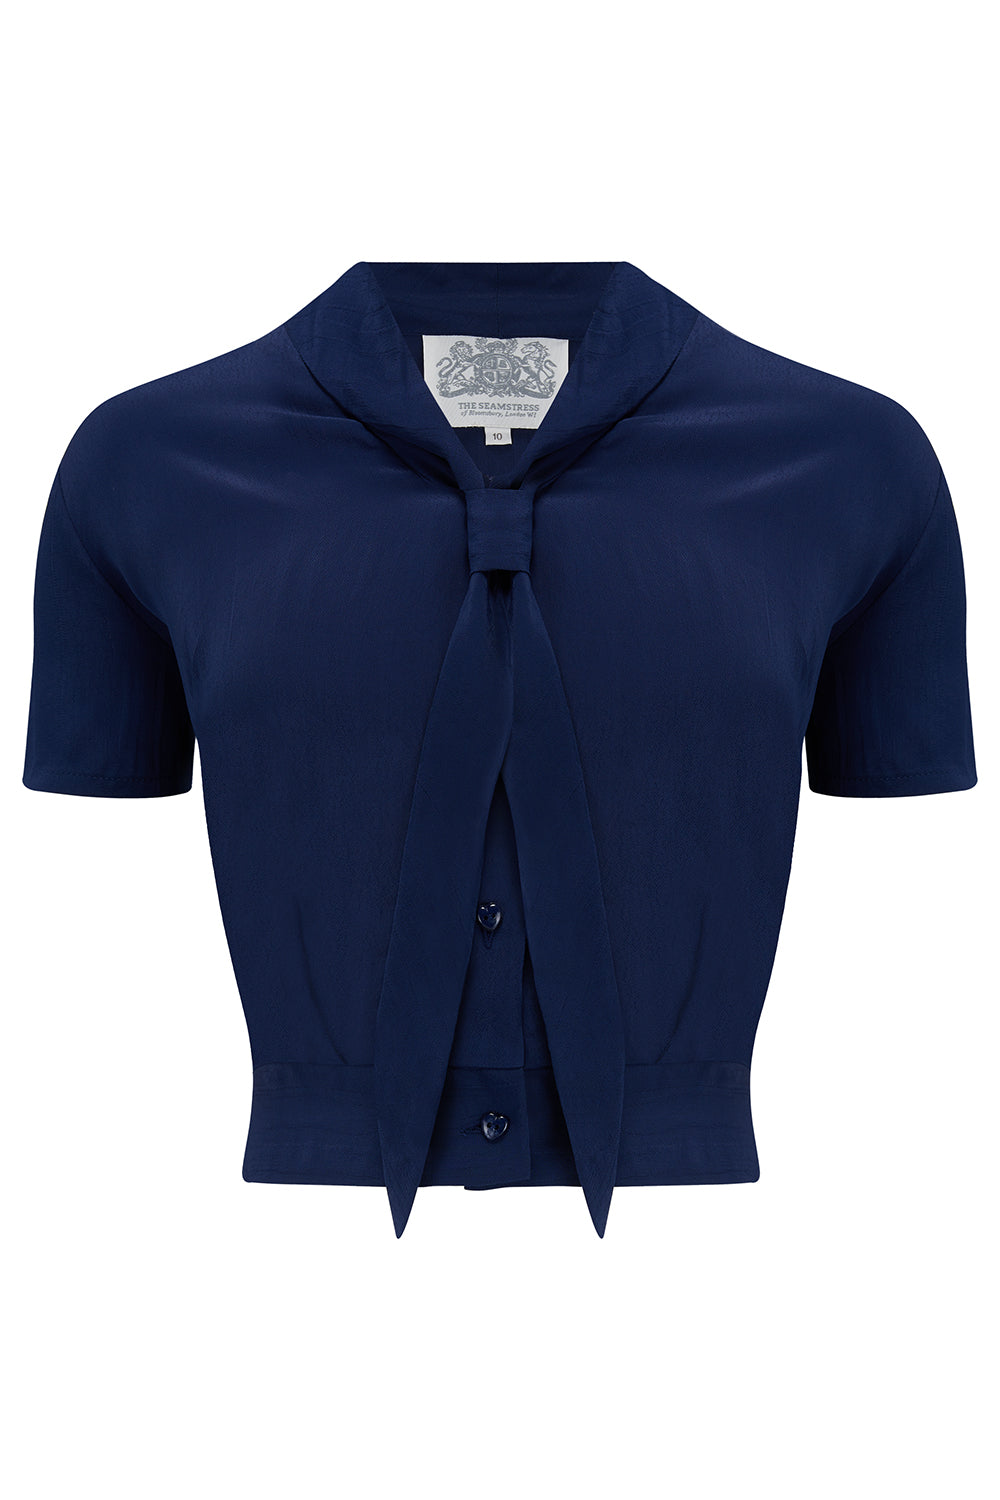 "Bonnie" Blouse in Navy by The Seamstress of Bloomsbury, Classic 1940s Vintage Inspired Style - CC41, Goodwood Revival, Twinwood Festival, Viva Las Vegas Rockabilly Weekend Rock n Romance The Seamstress Of Bloomsbury